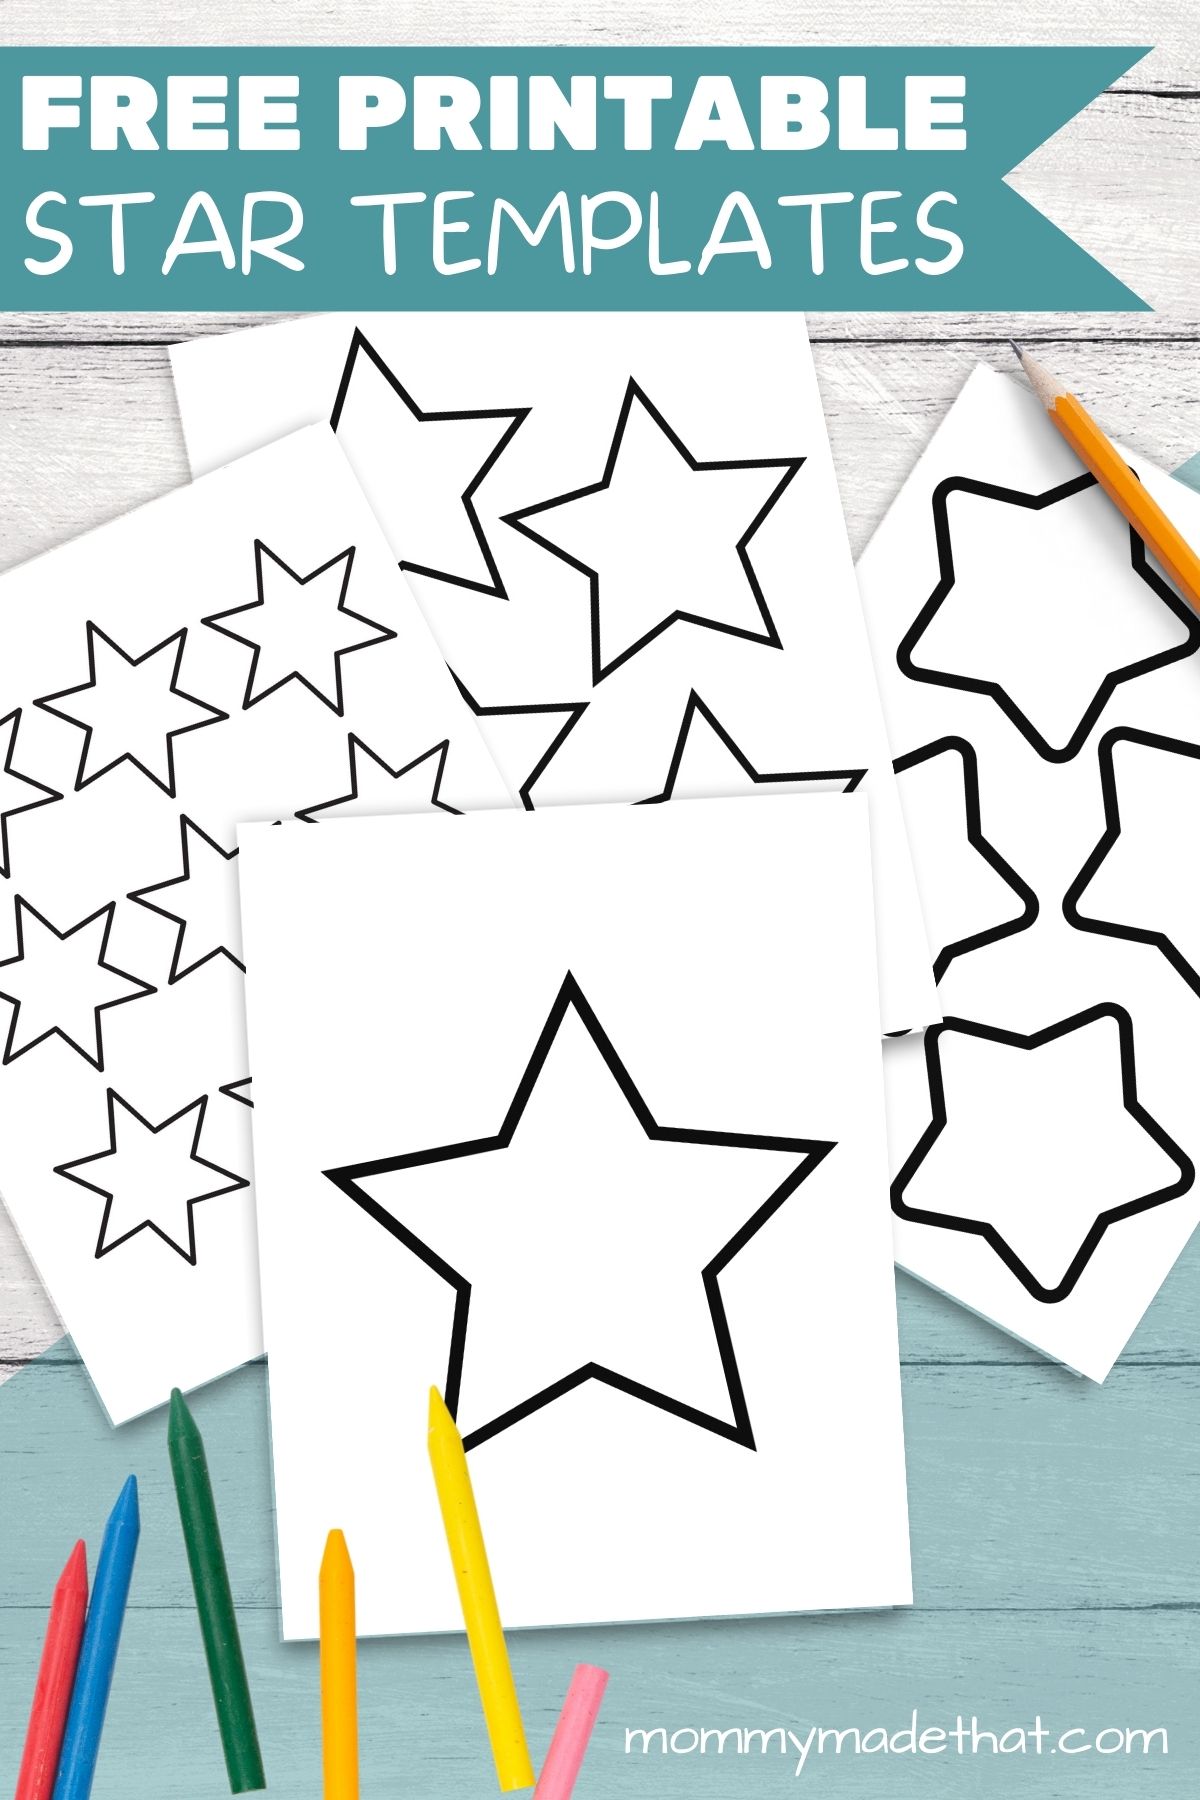 Free Printable Star Templates: Giant list of Shapes and Sizes!